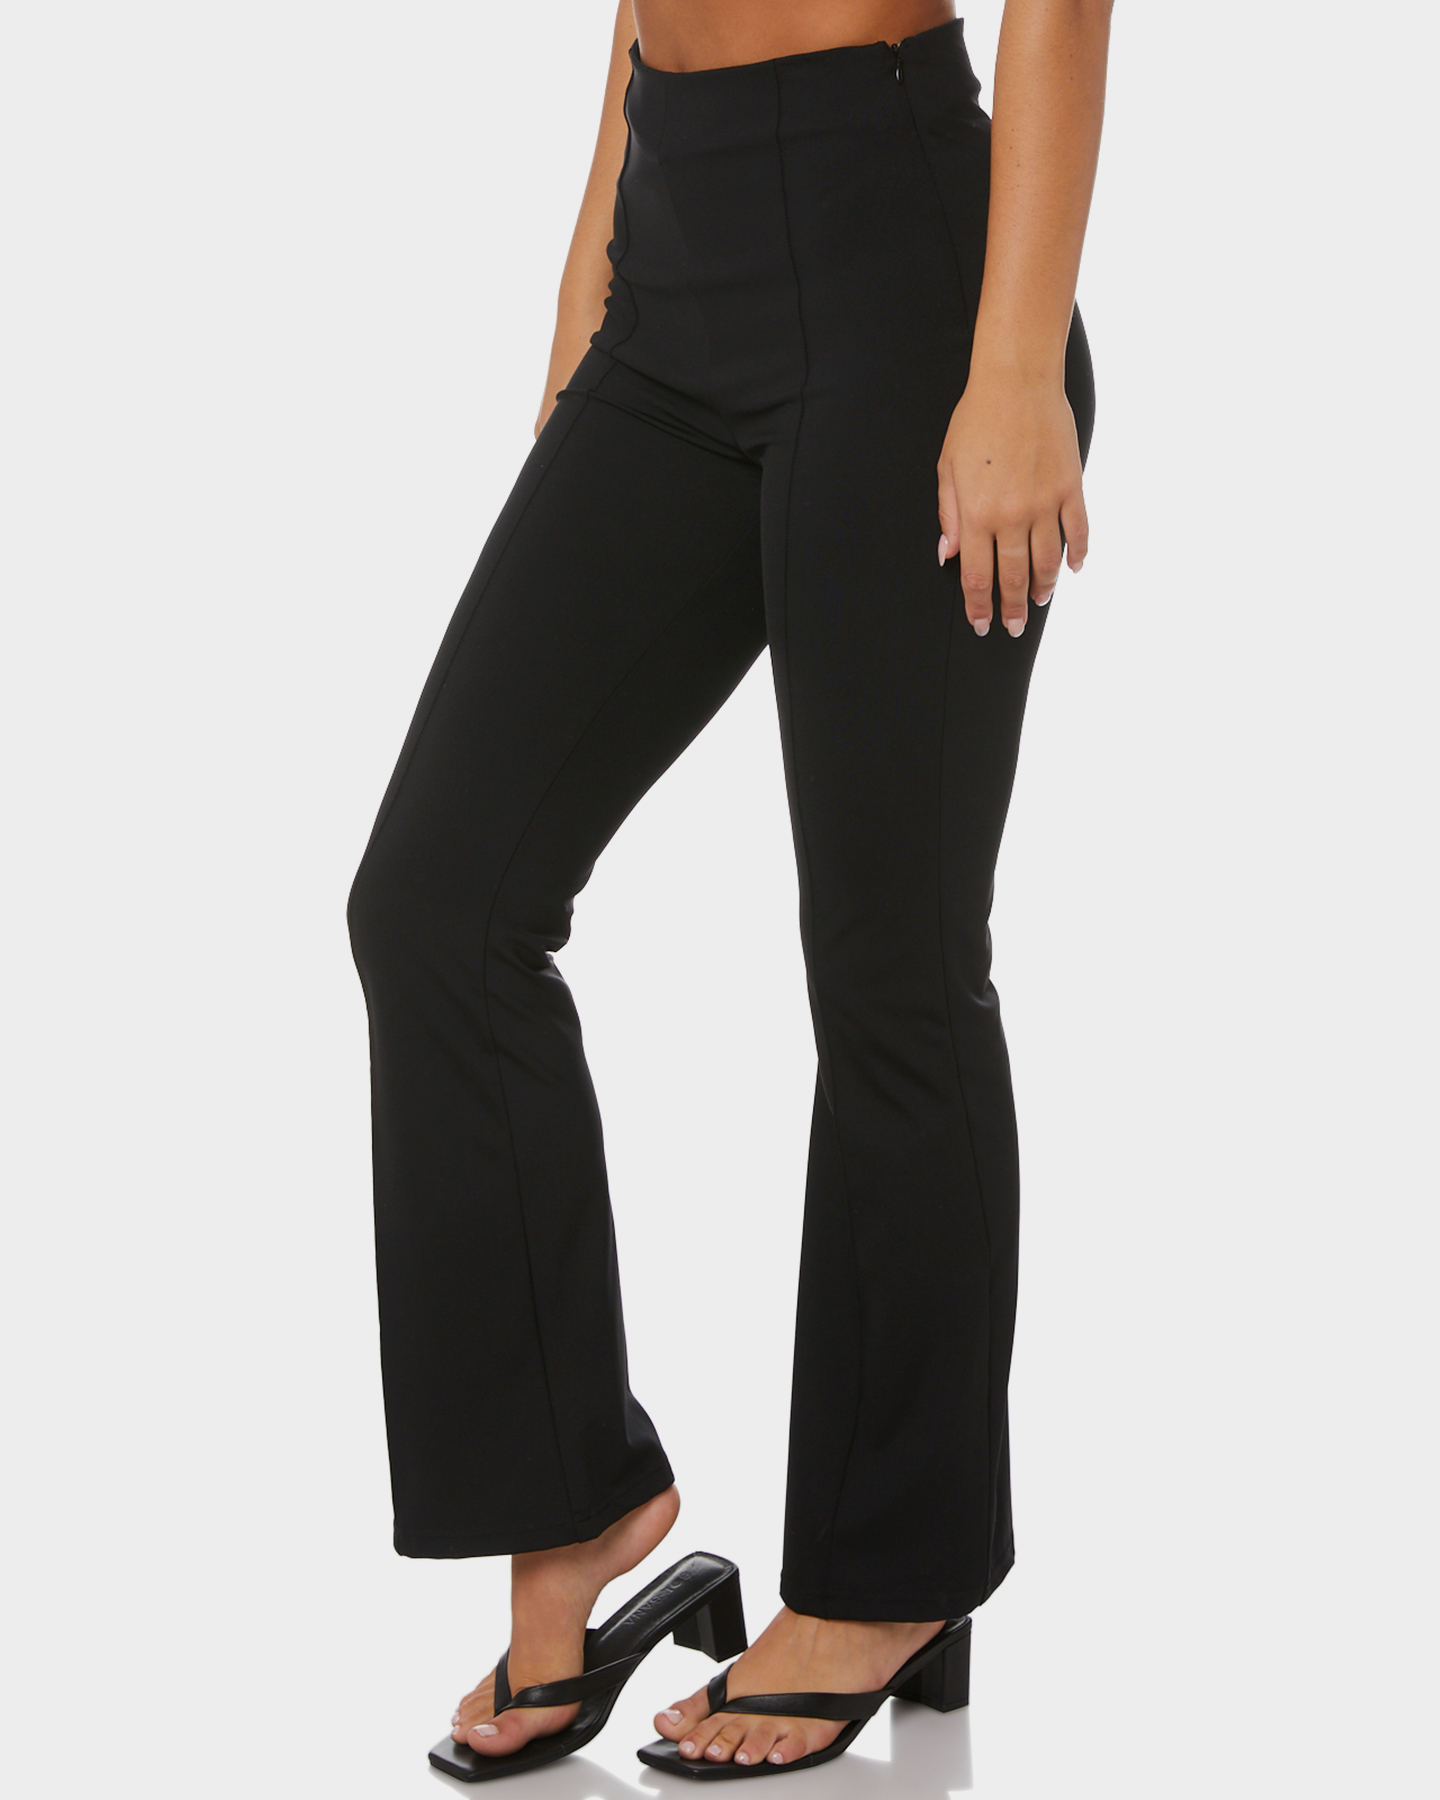 All About Eve Dani Pant - Black | SurfStitch